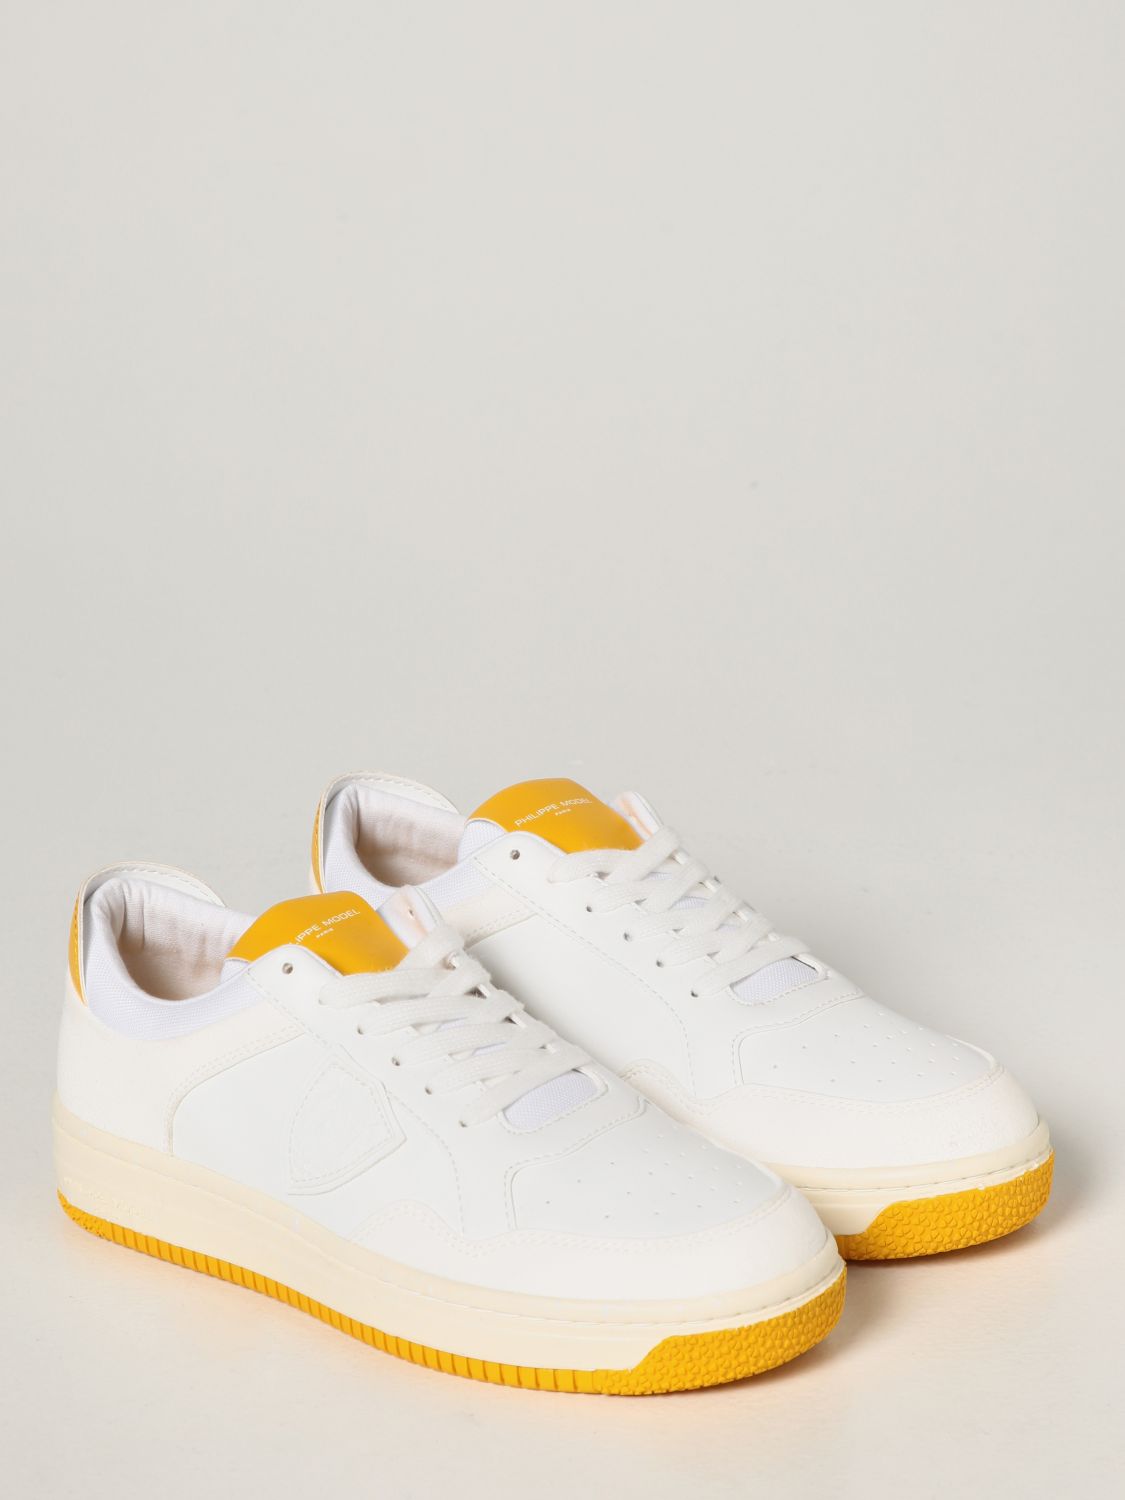 Sneakers Acbc X Philippe Model: Lyon Philippe Model trainers yellow 2